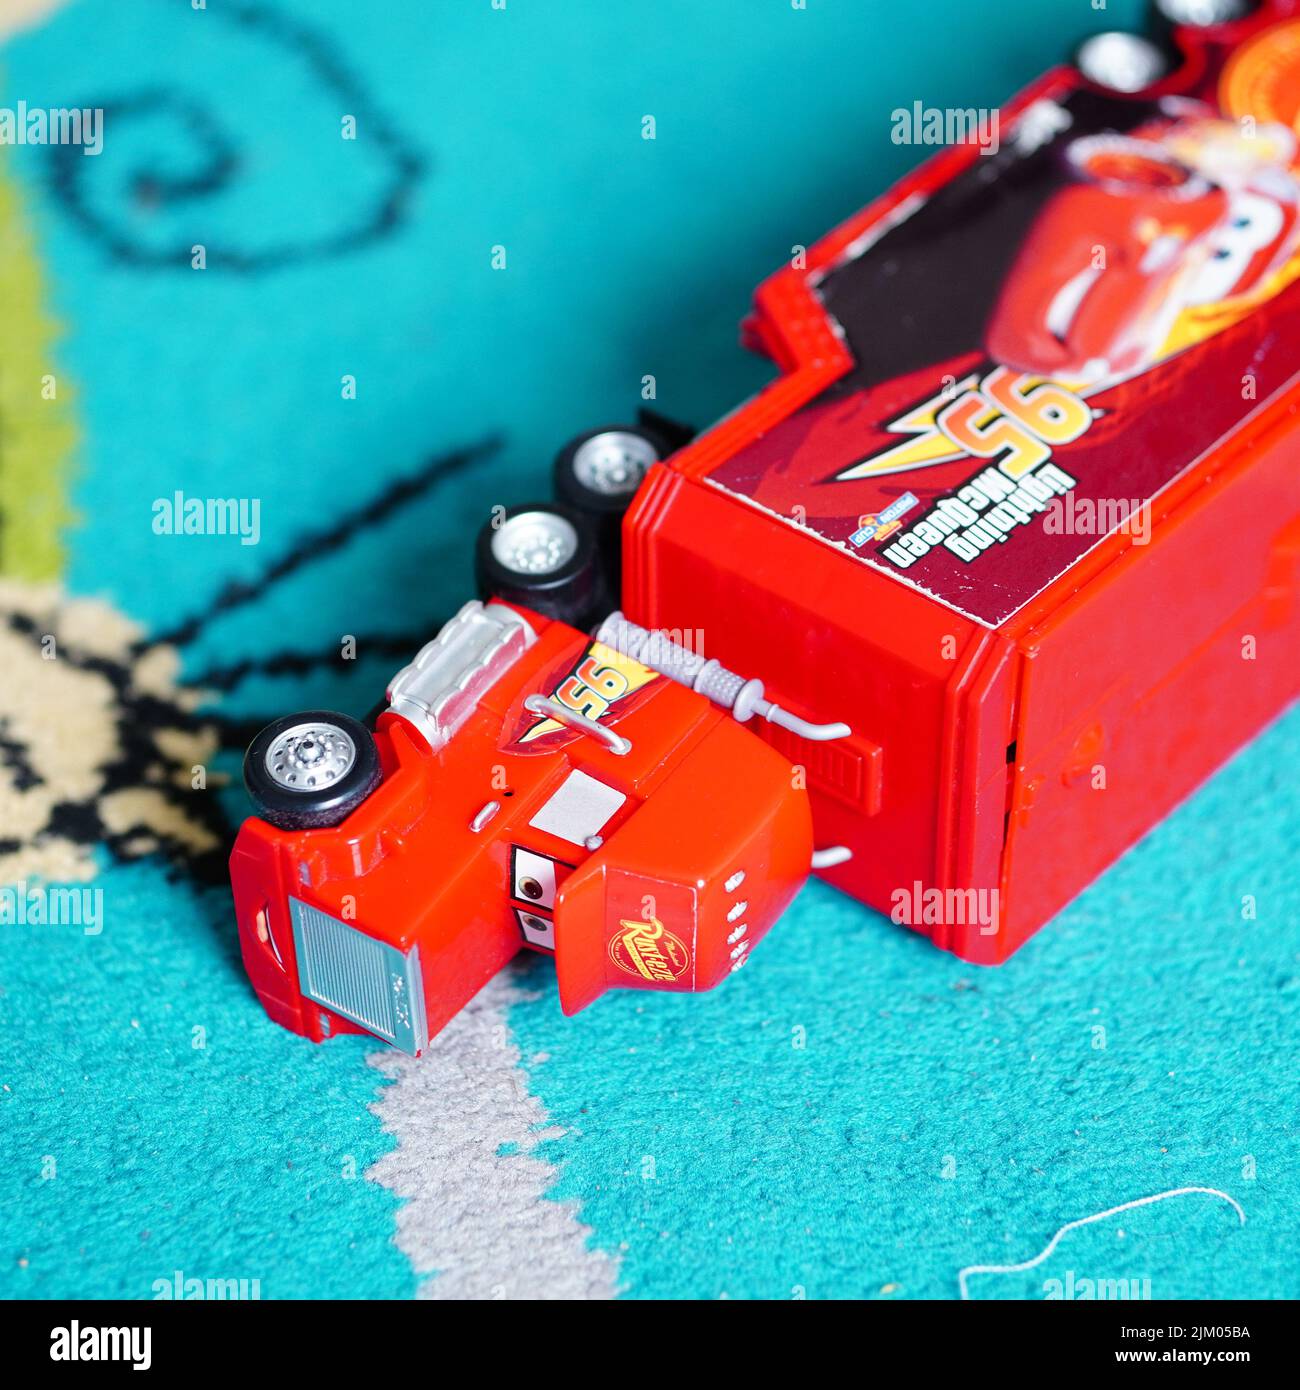 A Mattel brand red toy model truck of the Disney Pixar movie Cars laying on a carpet floor Stock Photo